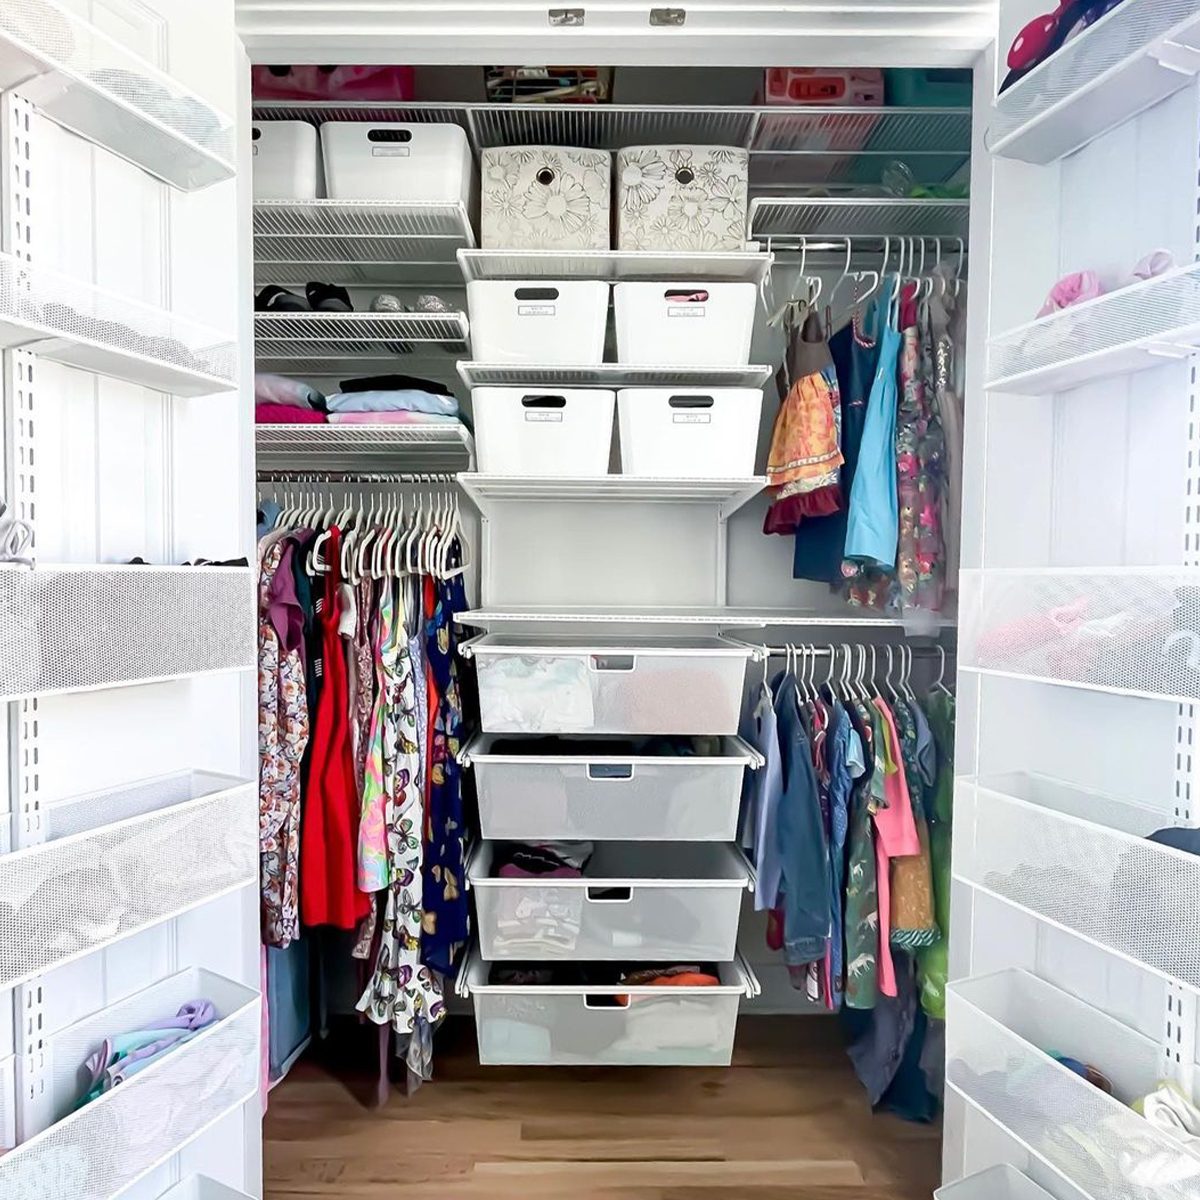 10 Bedroom Closet Ideas To Optimize Your Space Elfa Closet System Courtesy @sortandstore